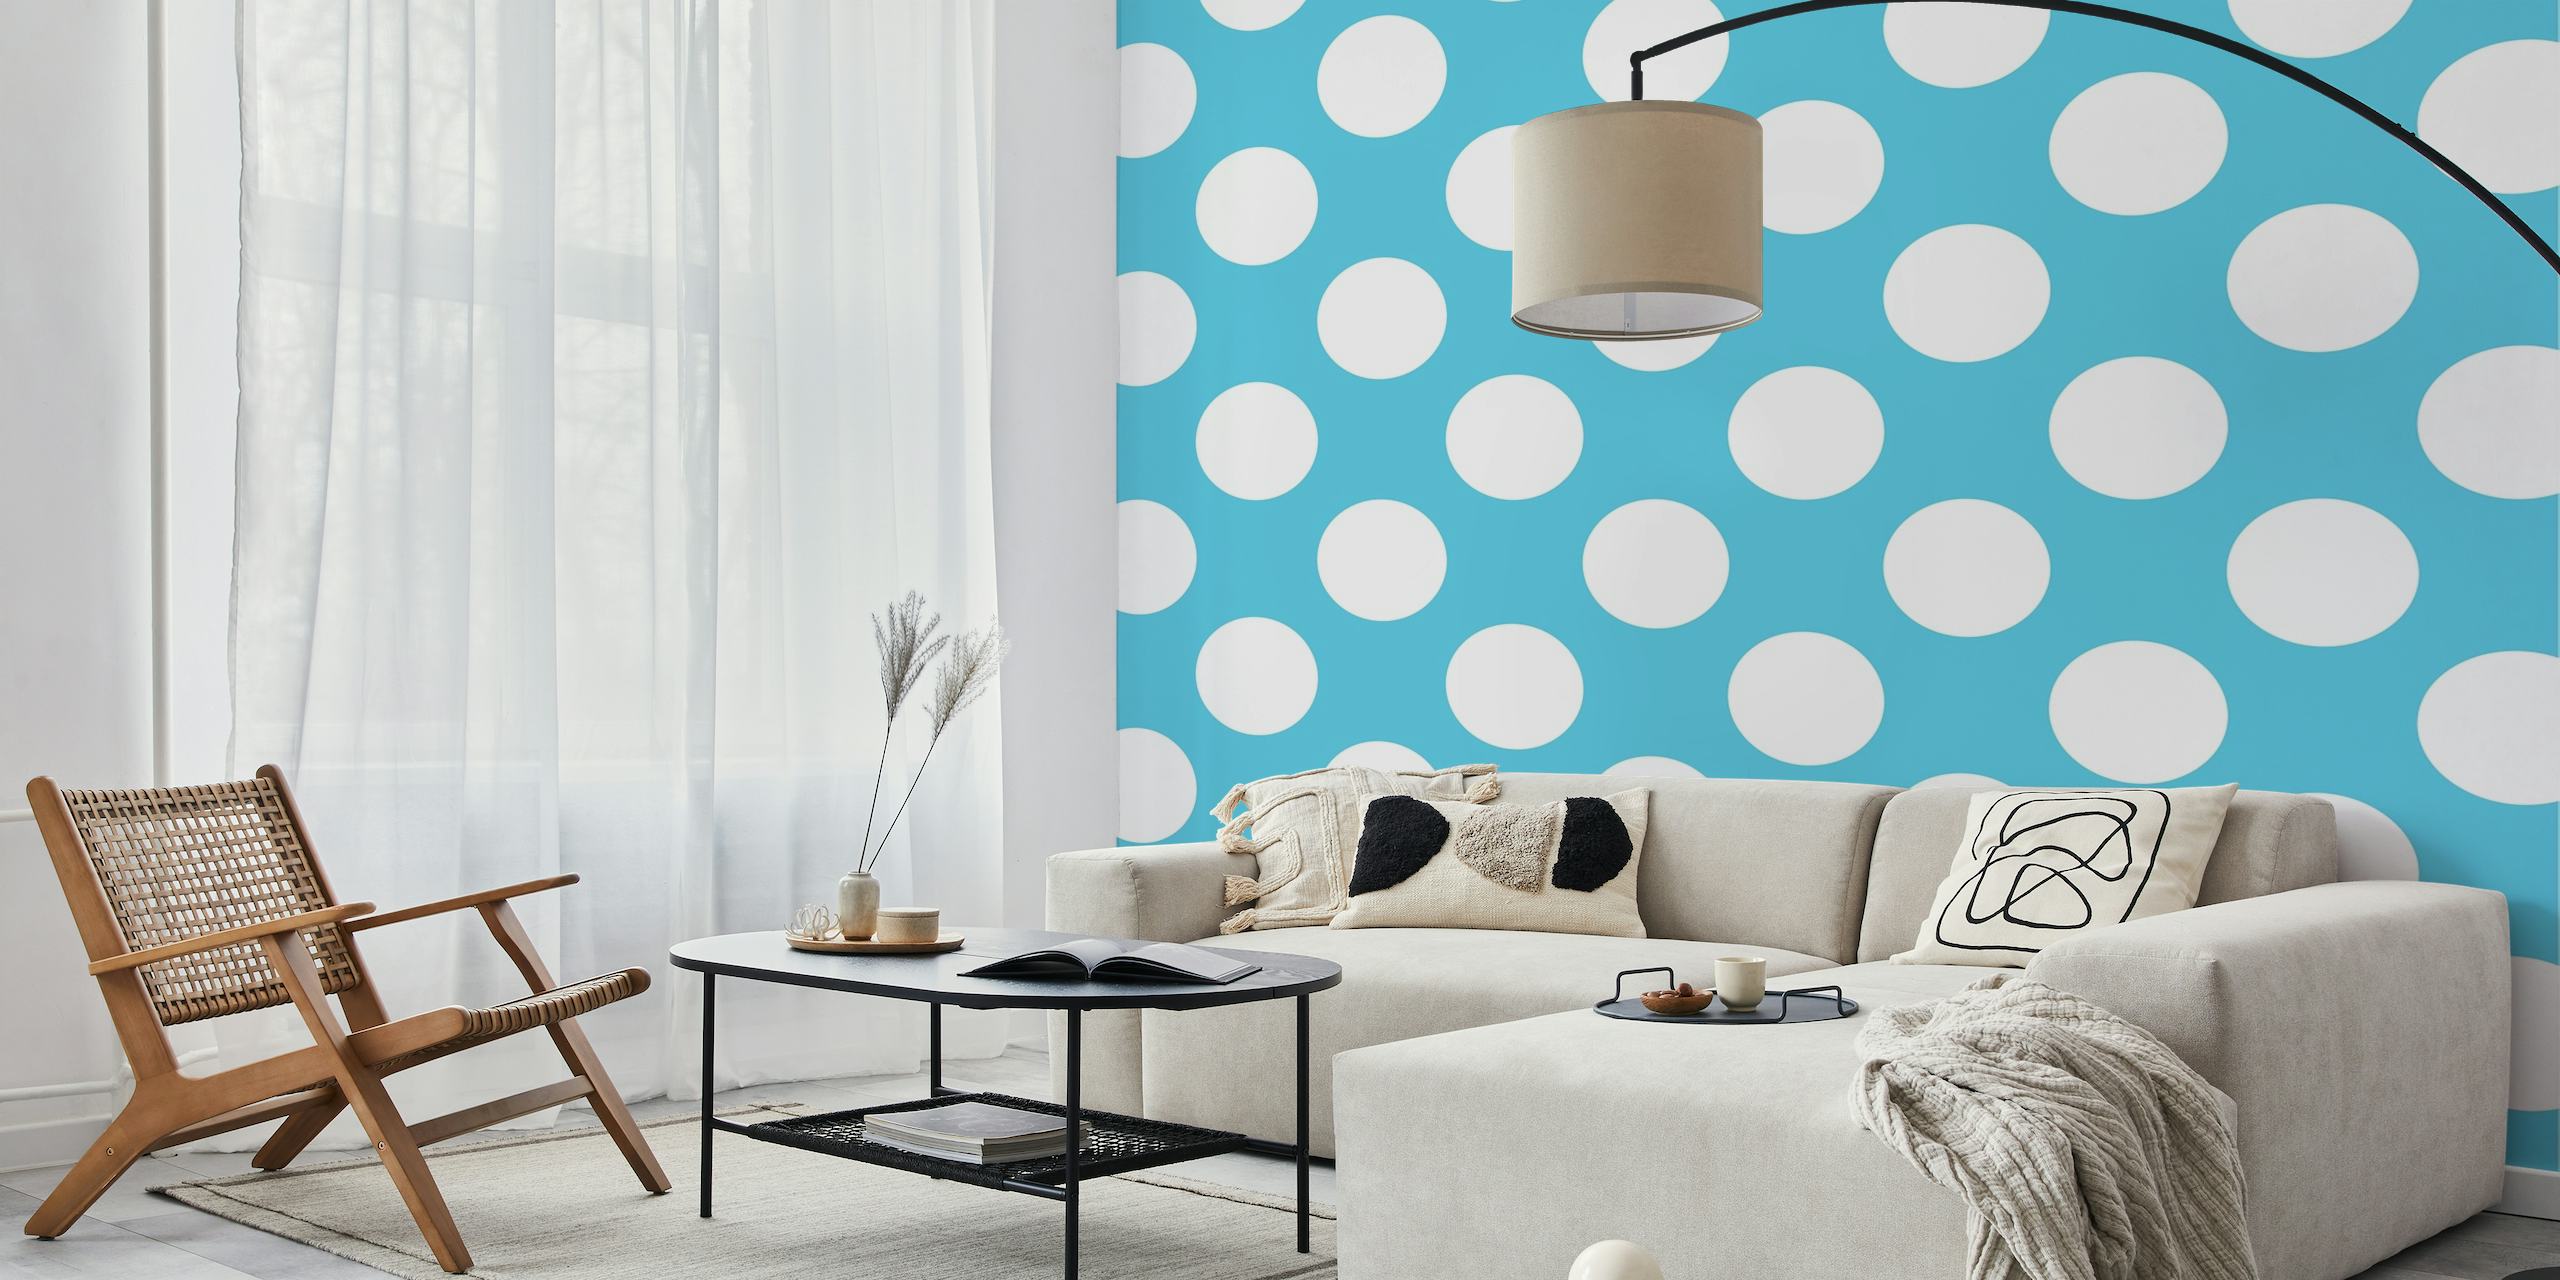 Sky blue polka dotted pattern tapete